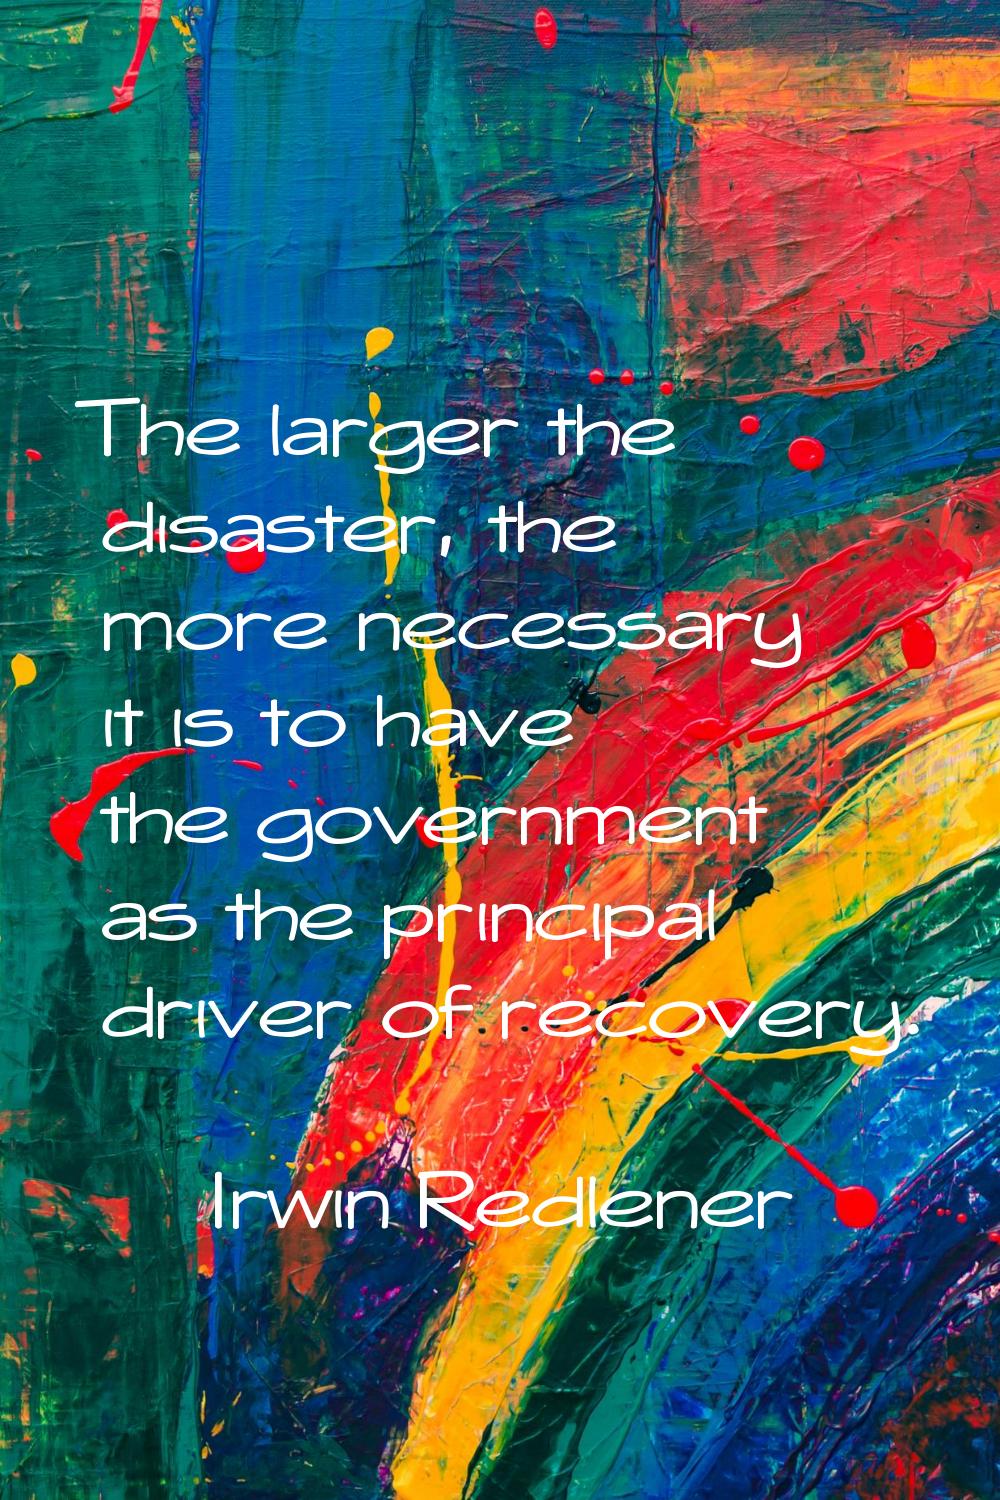 The larger the disaster, the more necessary it is to have the government as the principal driver of